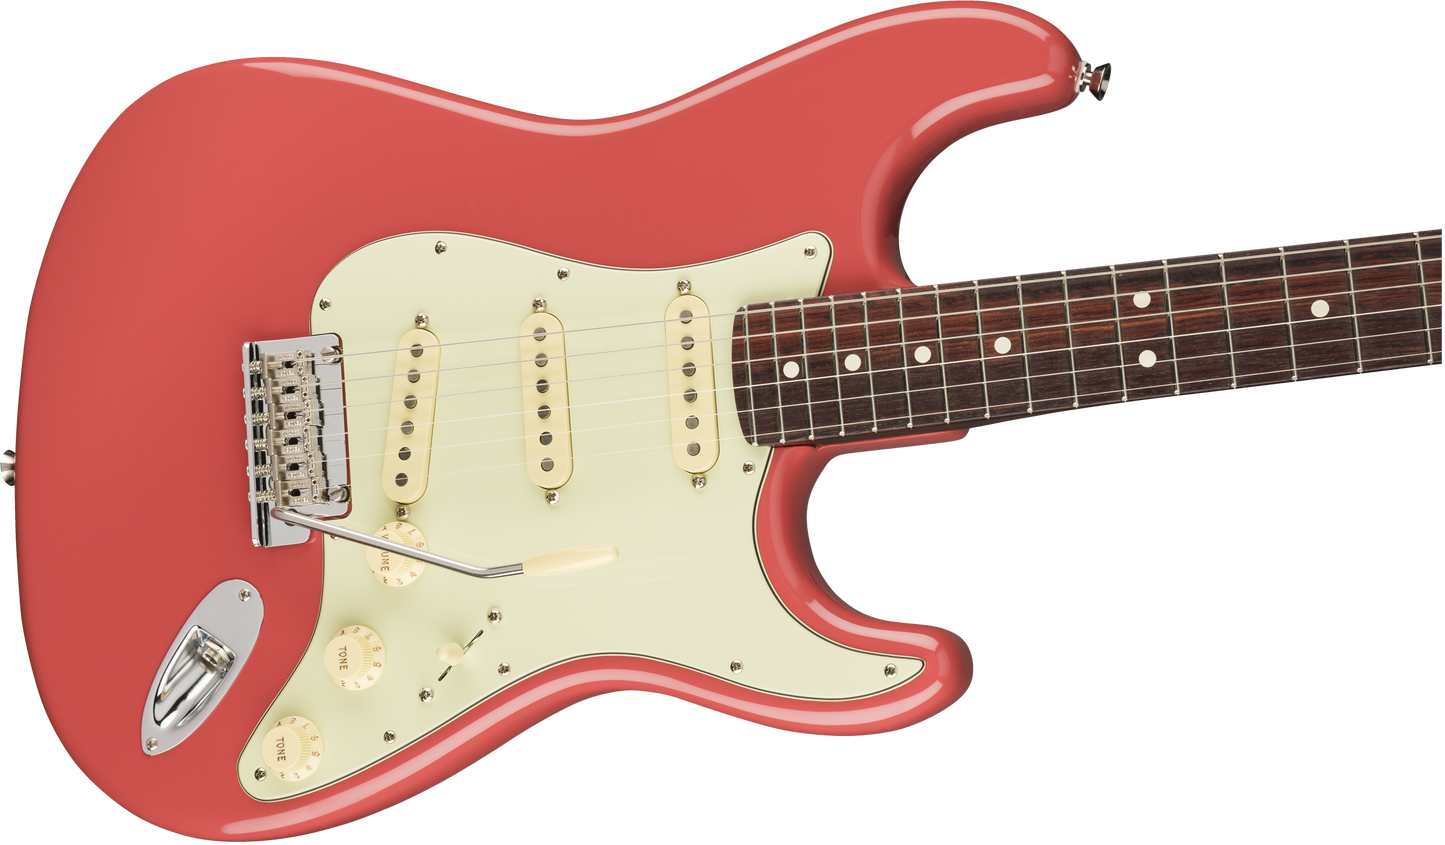 2020 Limited Edition American Professional Stratocaster®, Solid Rosewood Neck, Fiesta Red